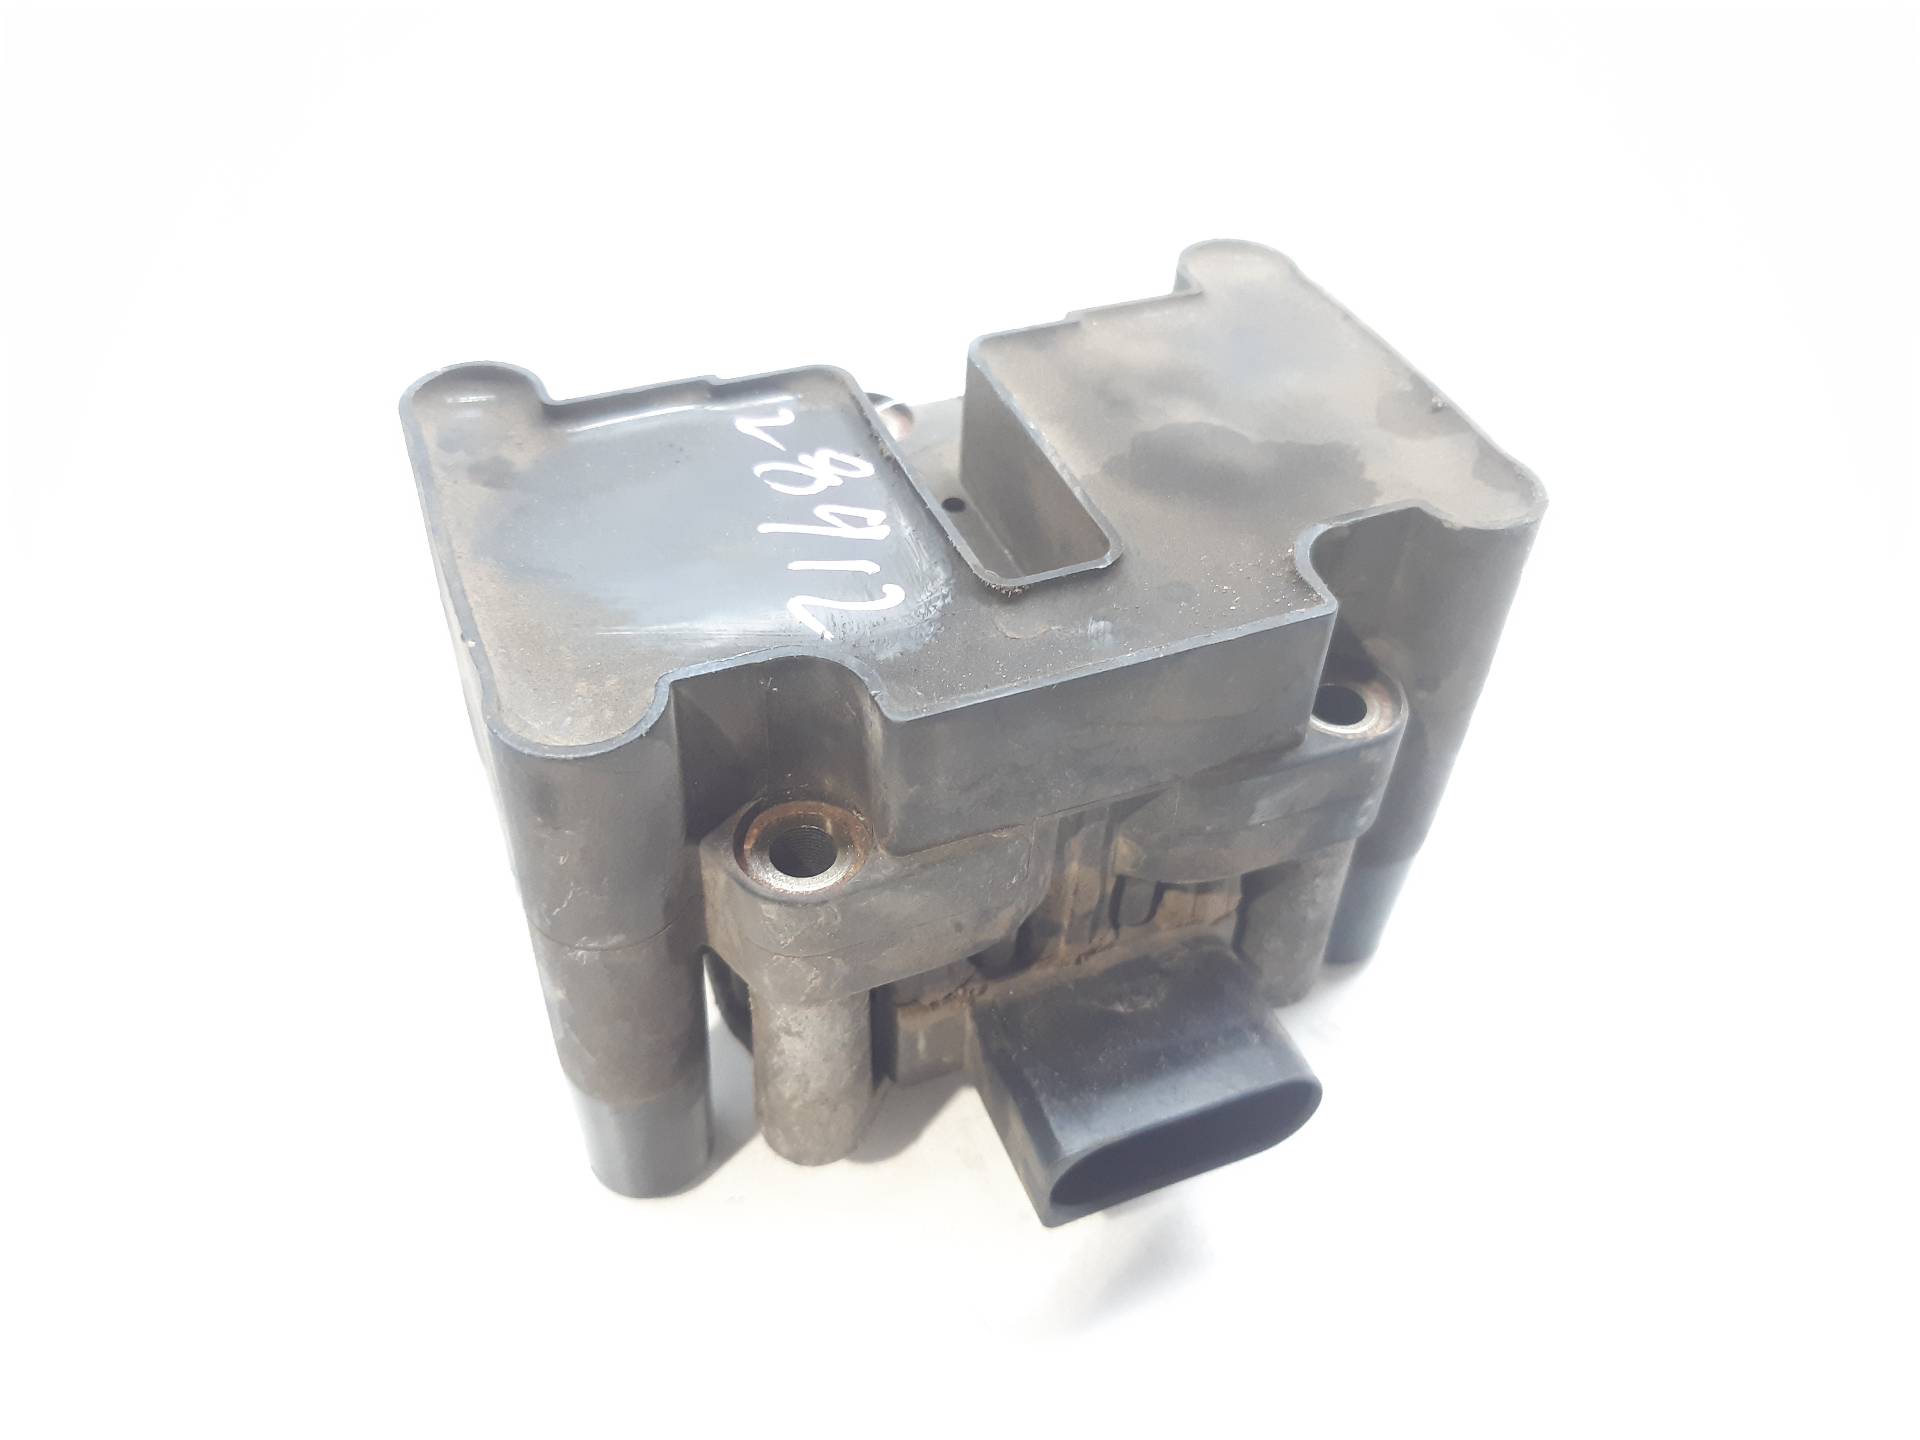 SEAT Ibiza 2 generation (1993-2002) High Voltage Ignition Coil 032905106B 22460247